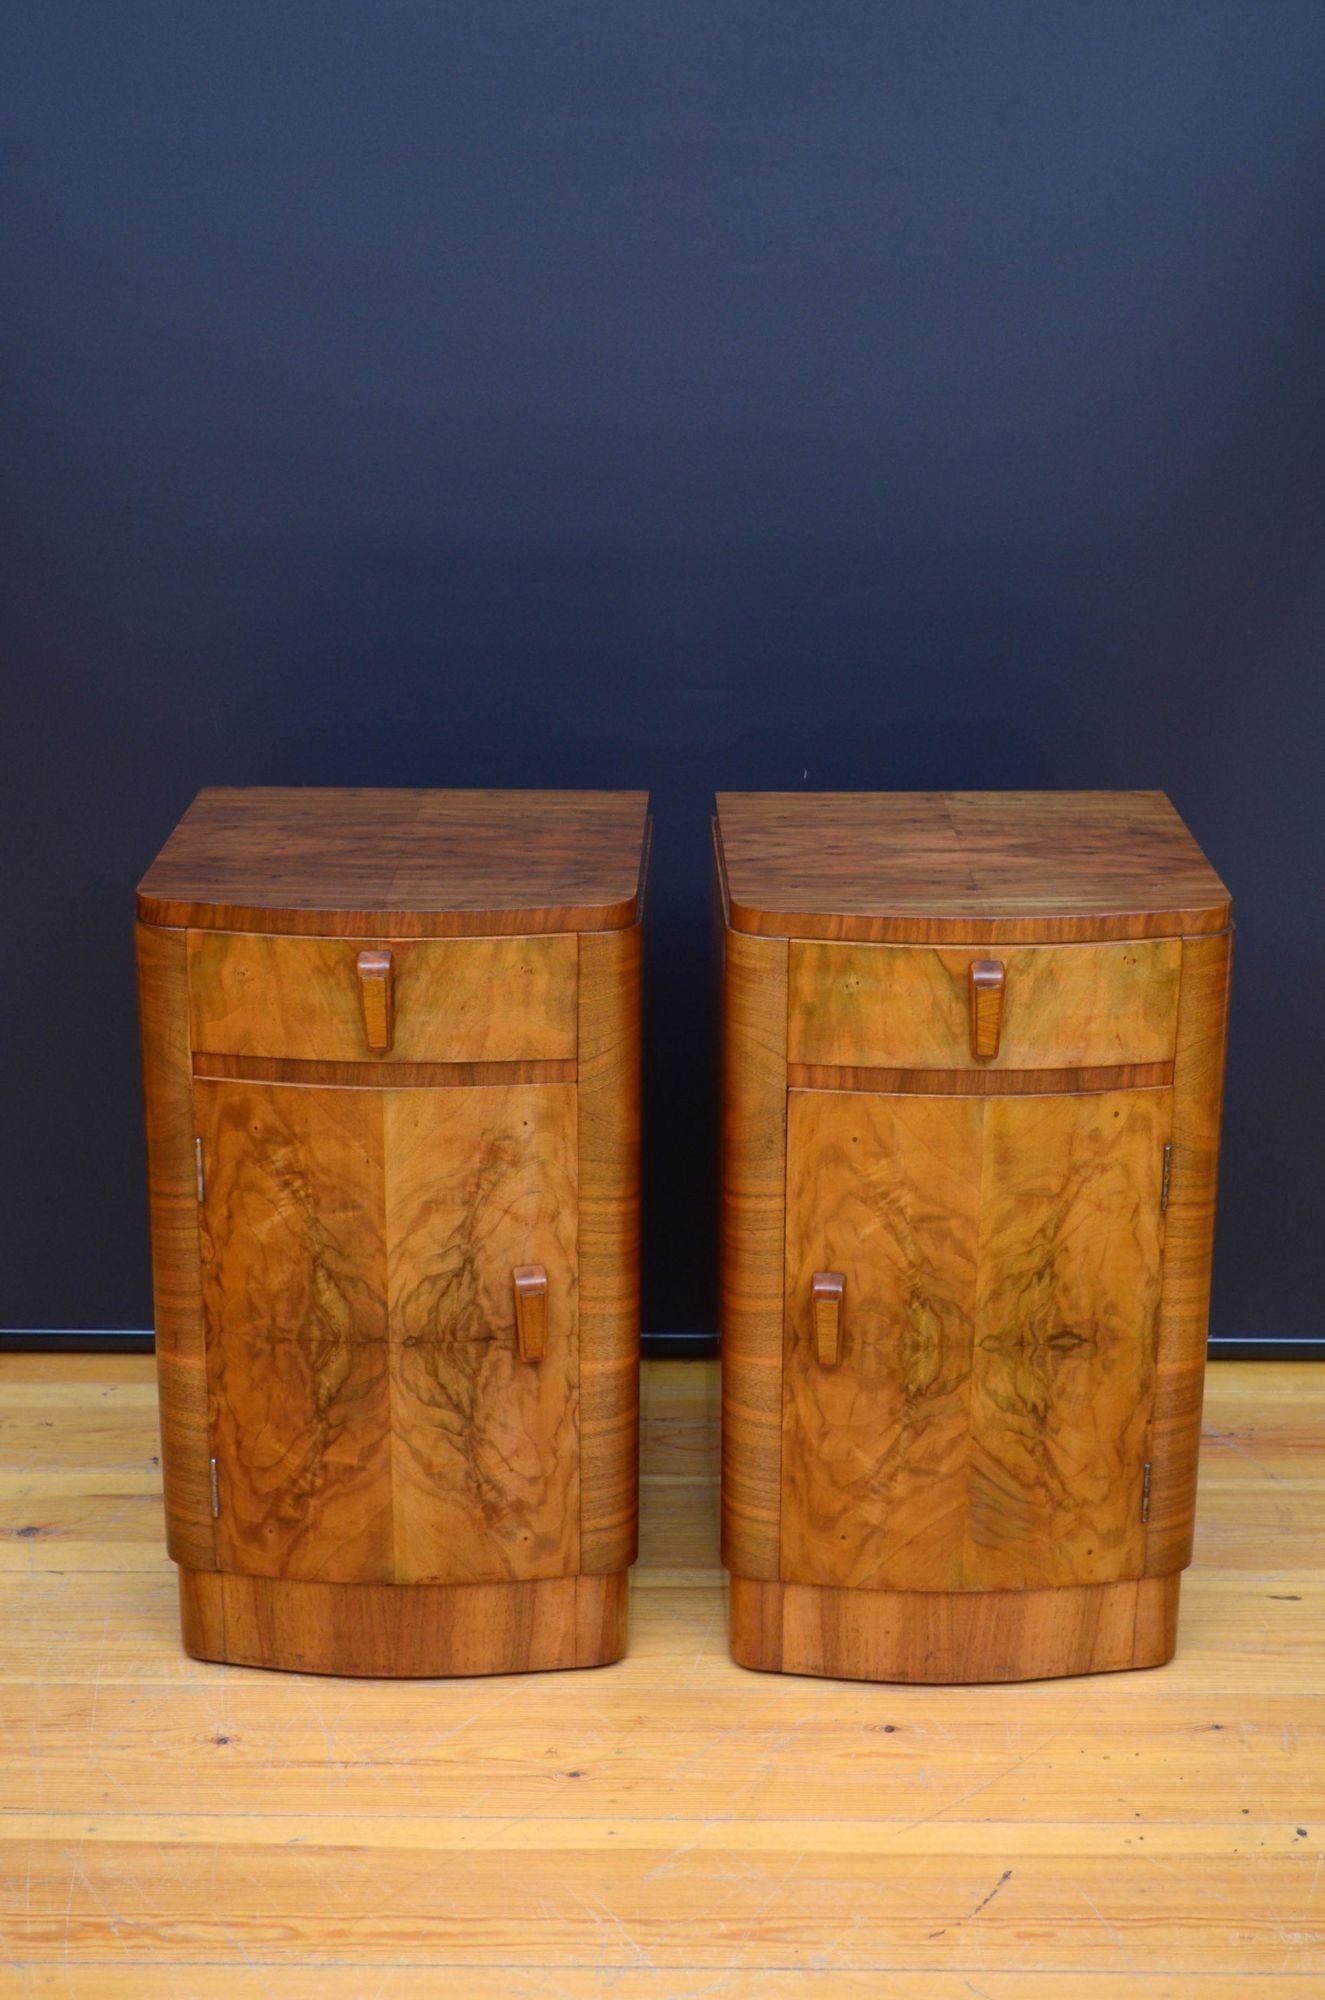 Sn5469 Pair of Art Deco walnut bedside cupboard of bow fronted design, each having figured walnut top above a drawer and cupboard door, all fitted with original handles and standing on plinth base. This antique pair of bedside cabinets is in home